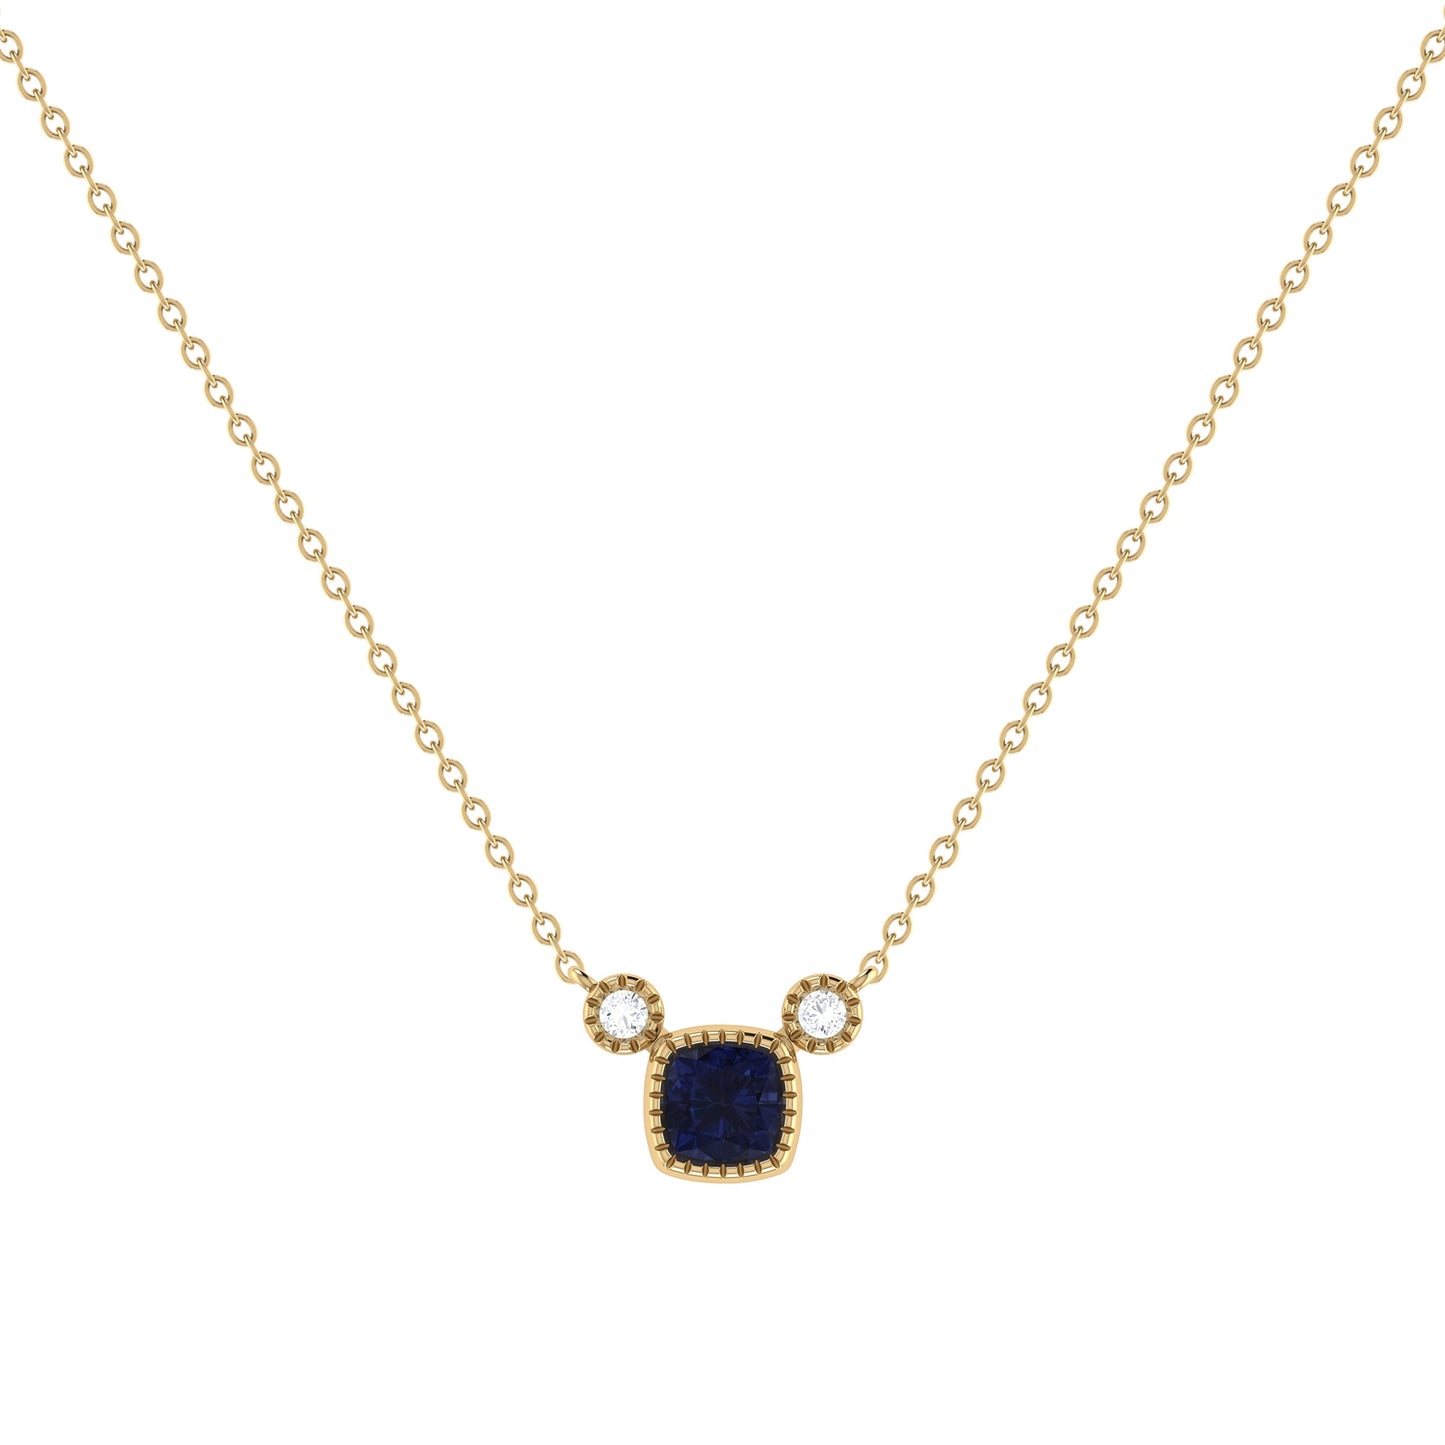 Cushion Cut Sapphire & Diamond Birthstone Necklace In 14K Yellow Gold by LuvMyJewelry